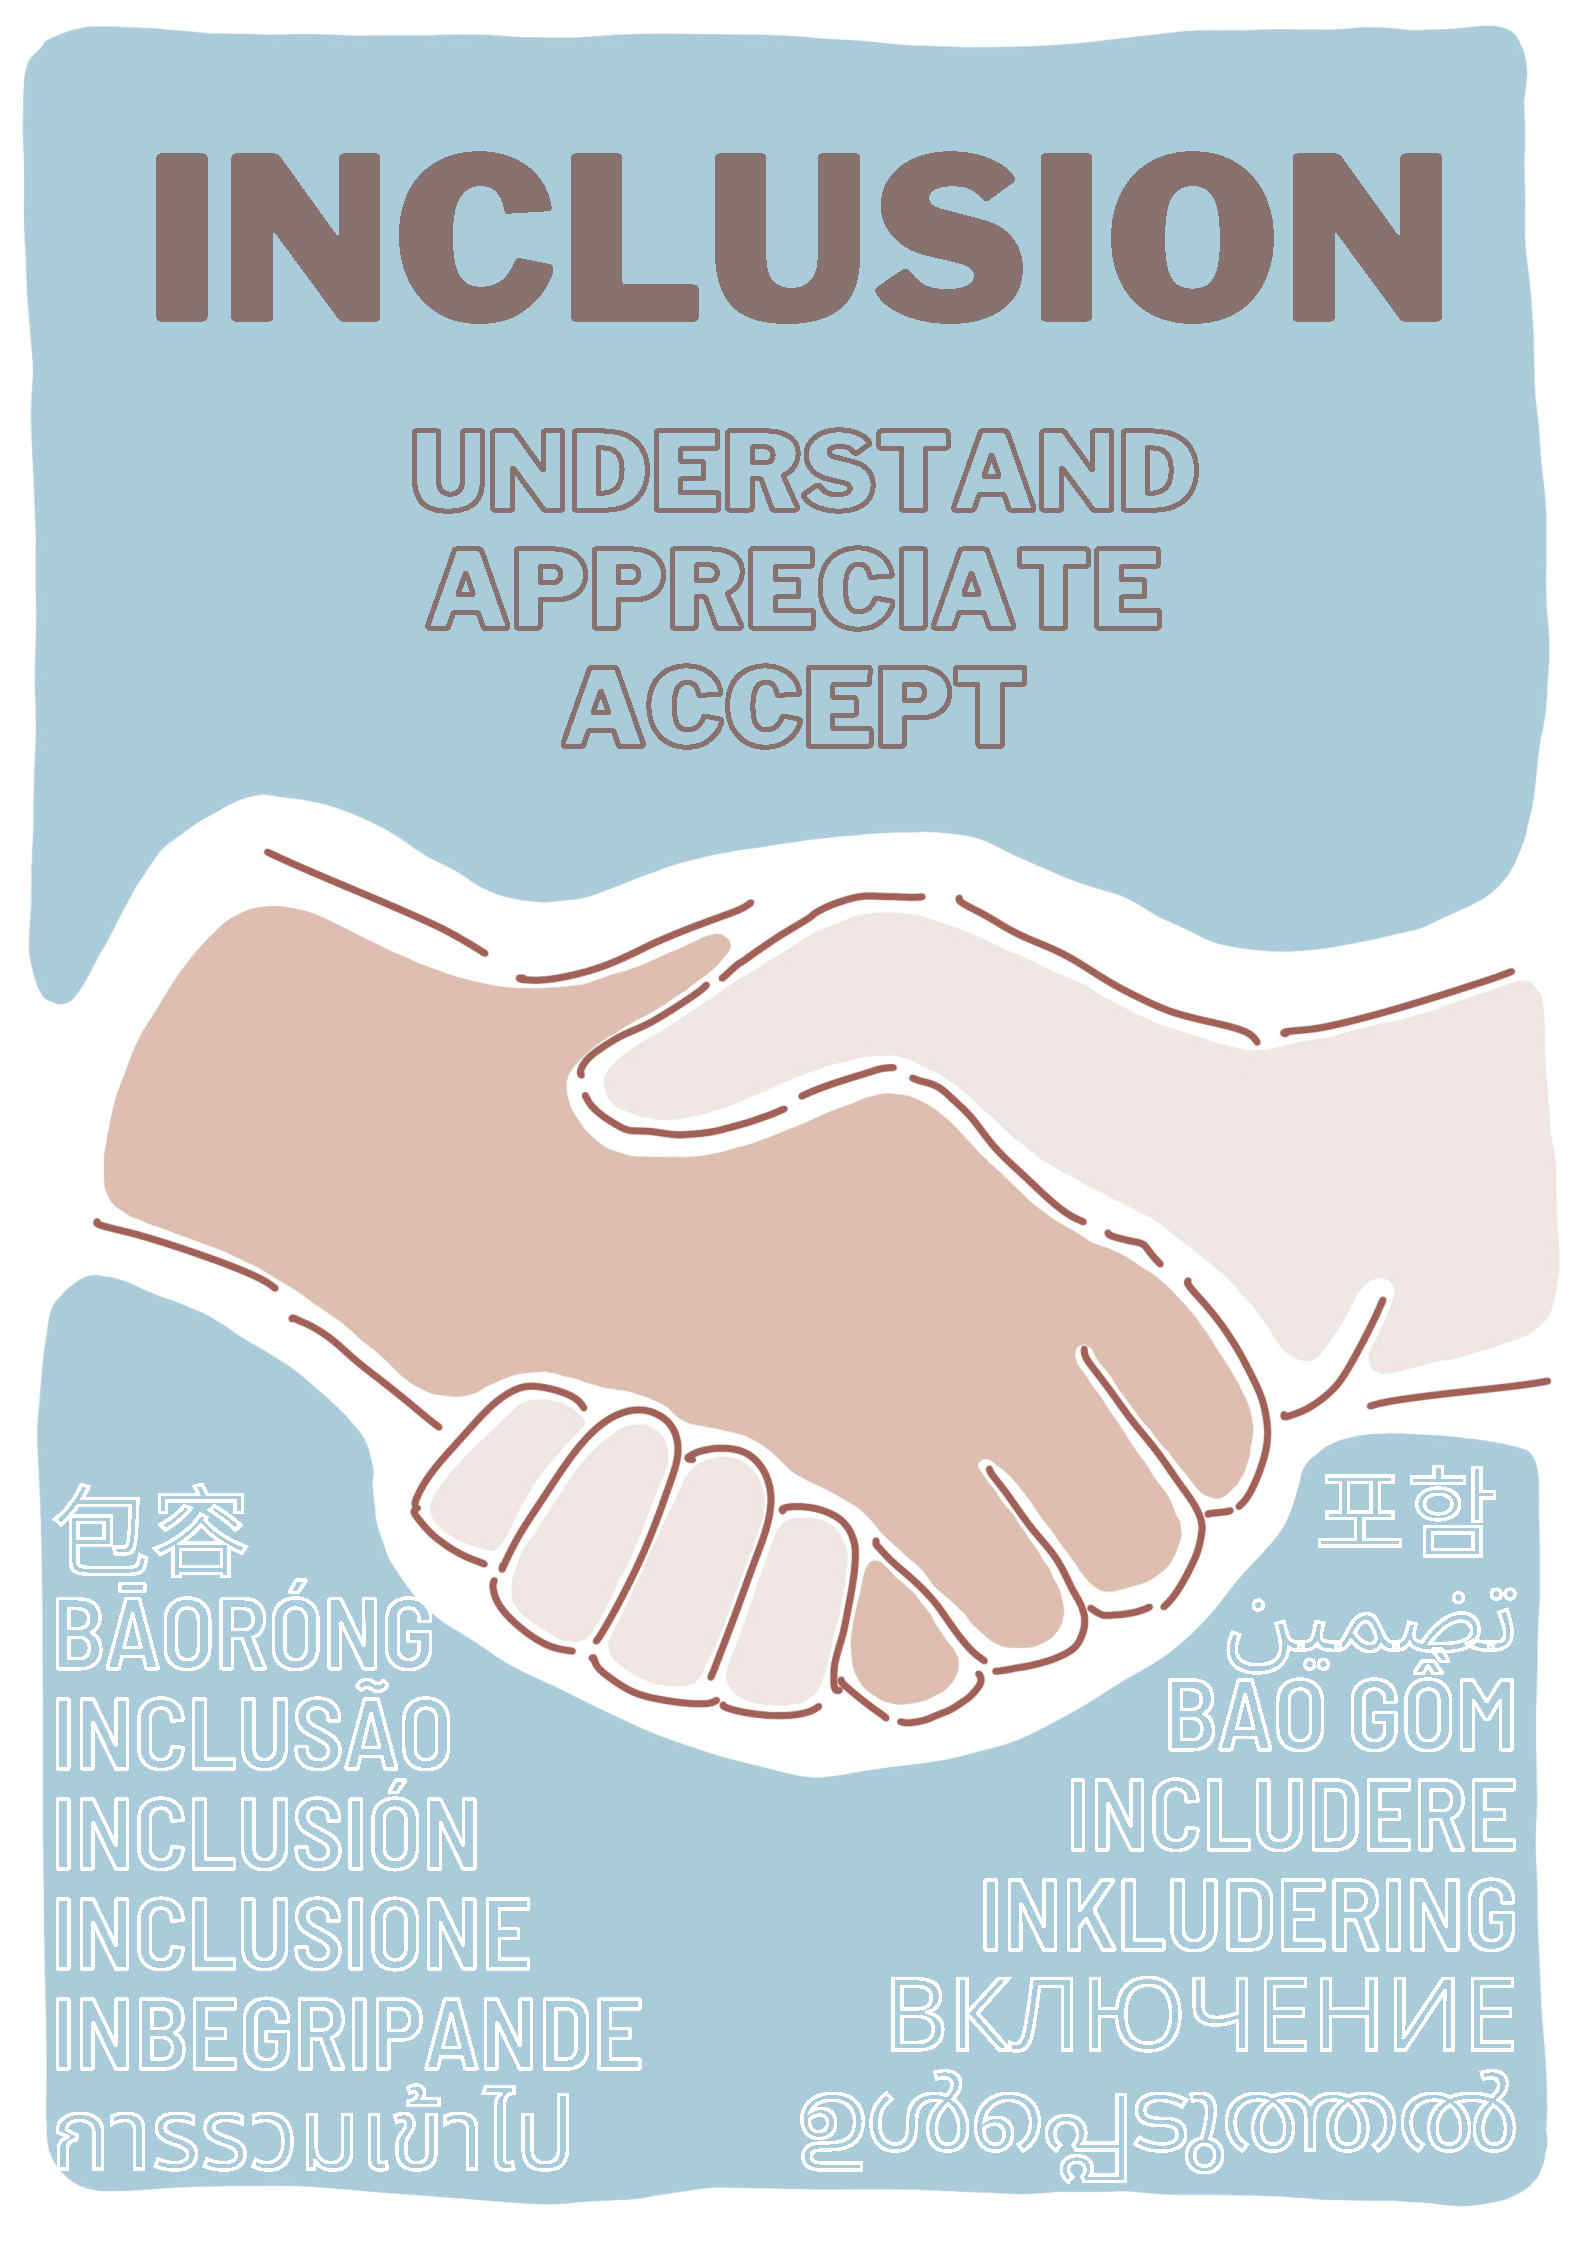 Merit: Wong Tsz Ching Ruby (Inclusion in HKU understand appreciate accept) This poster aims to promote inclusion in HKU. Inclusion can be achieved when we understand the uniqueness of each individual among the community, then we shall try to appreciate each other. On the poster visual design, The shaking hands of two individuals from different background (race, gender) signifies “acceptance”. The acceptance of our uniqueness and differences. And the acceptance of every one of us in the community. Hopefully this poster reminds every one of us to understand, appreciate, and accept - which cultivates inclusion.